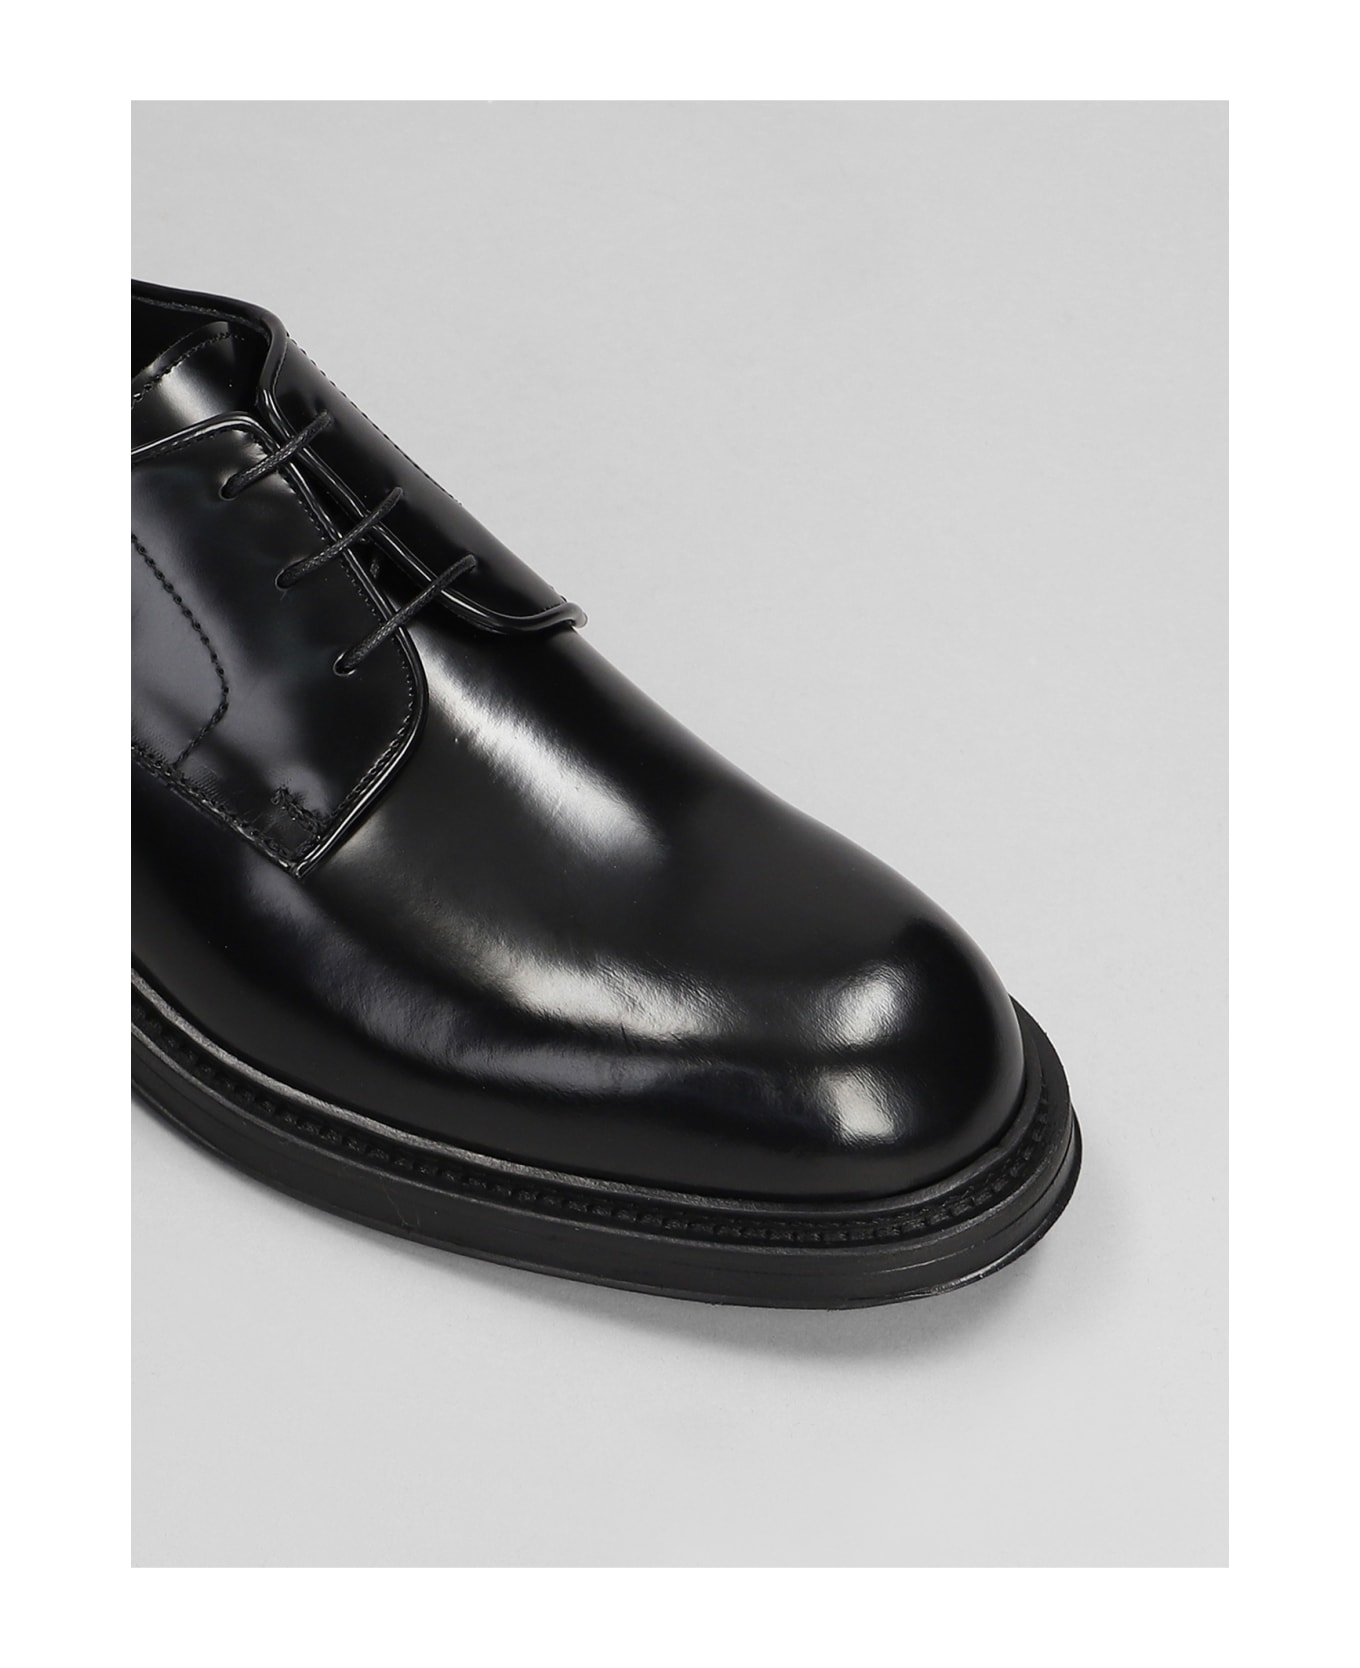 Emporio Armani Lace Up Shoes In Black Leather - black